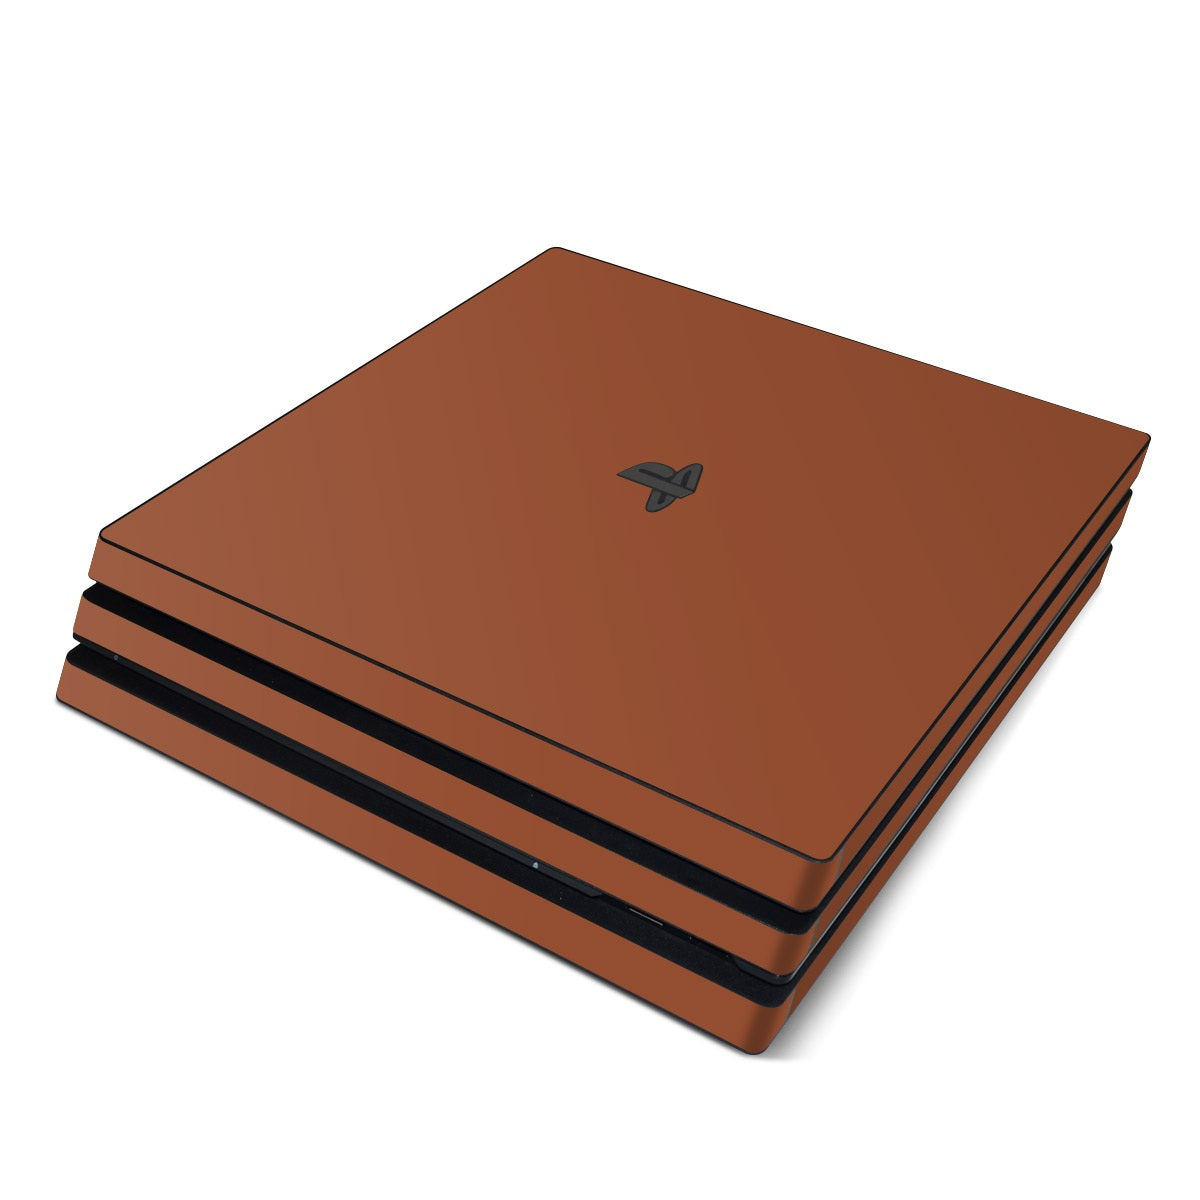 Solid State Cinnamon - Sony PS4 Pro Skin